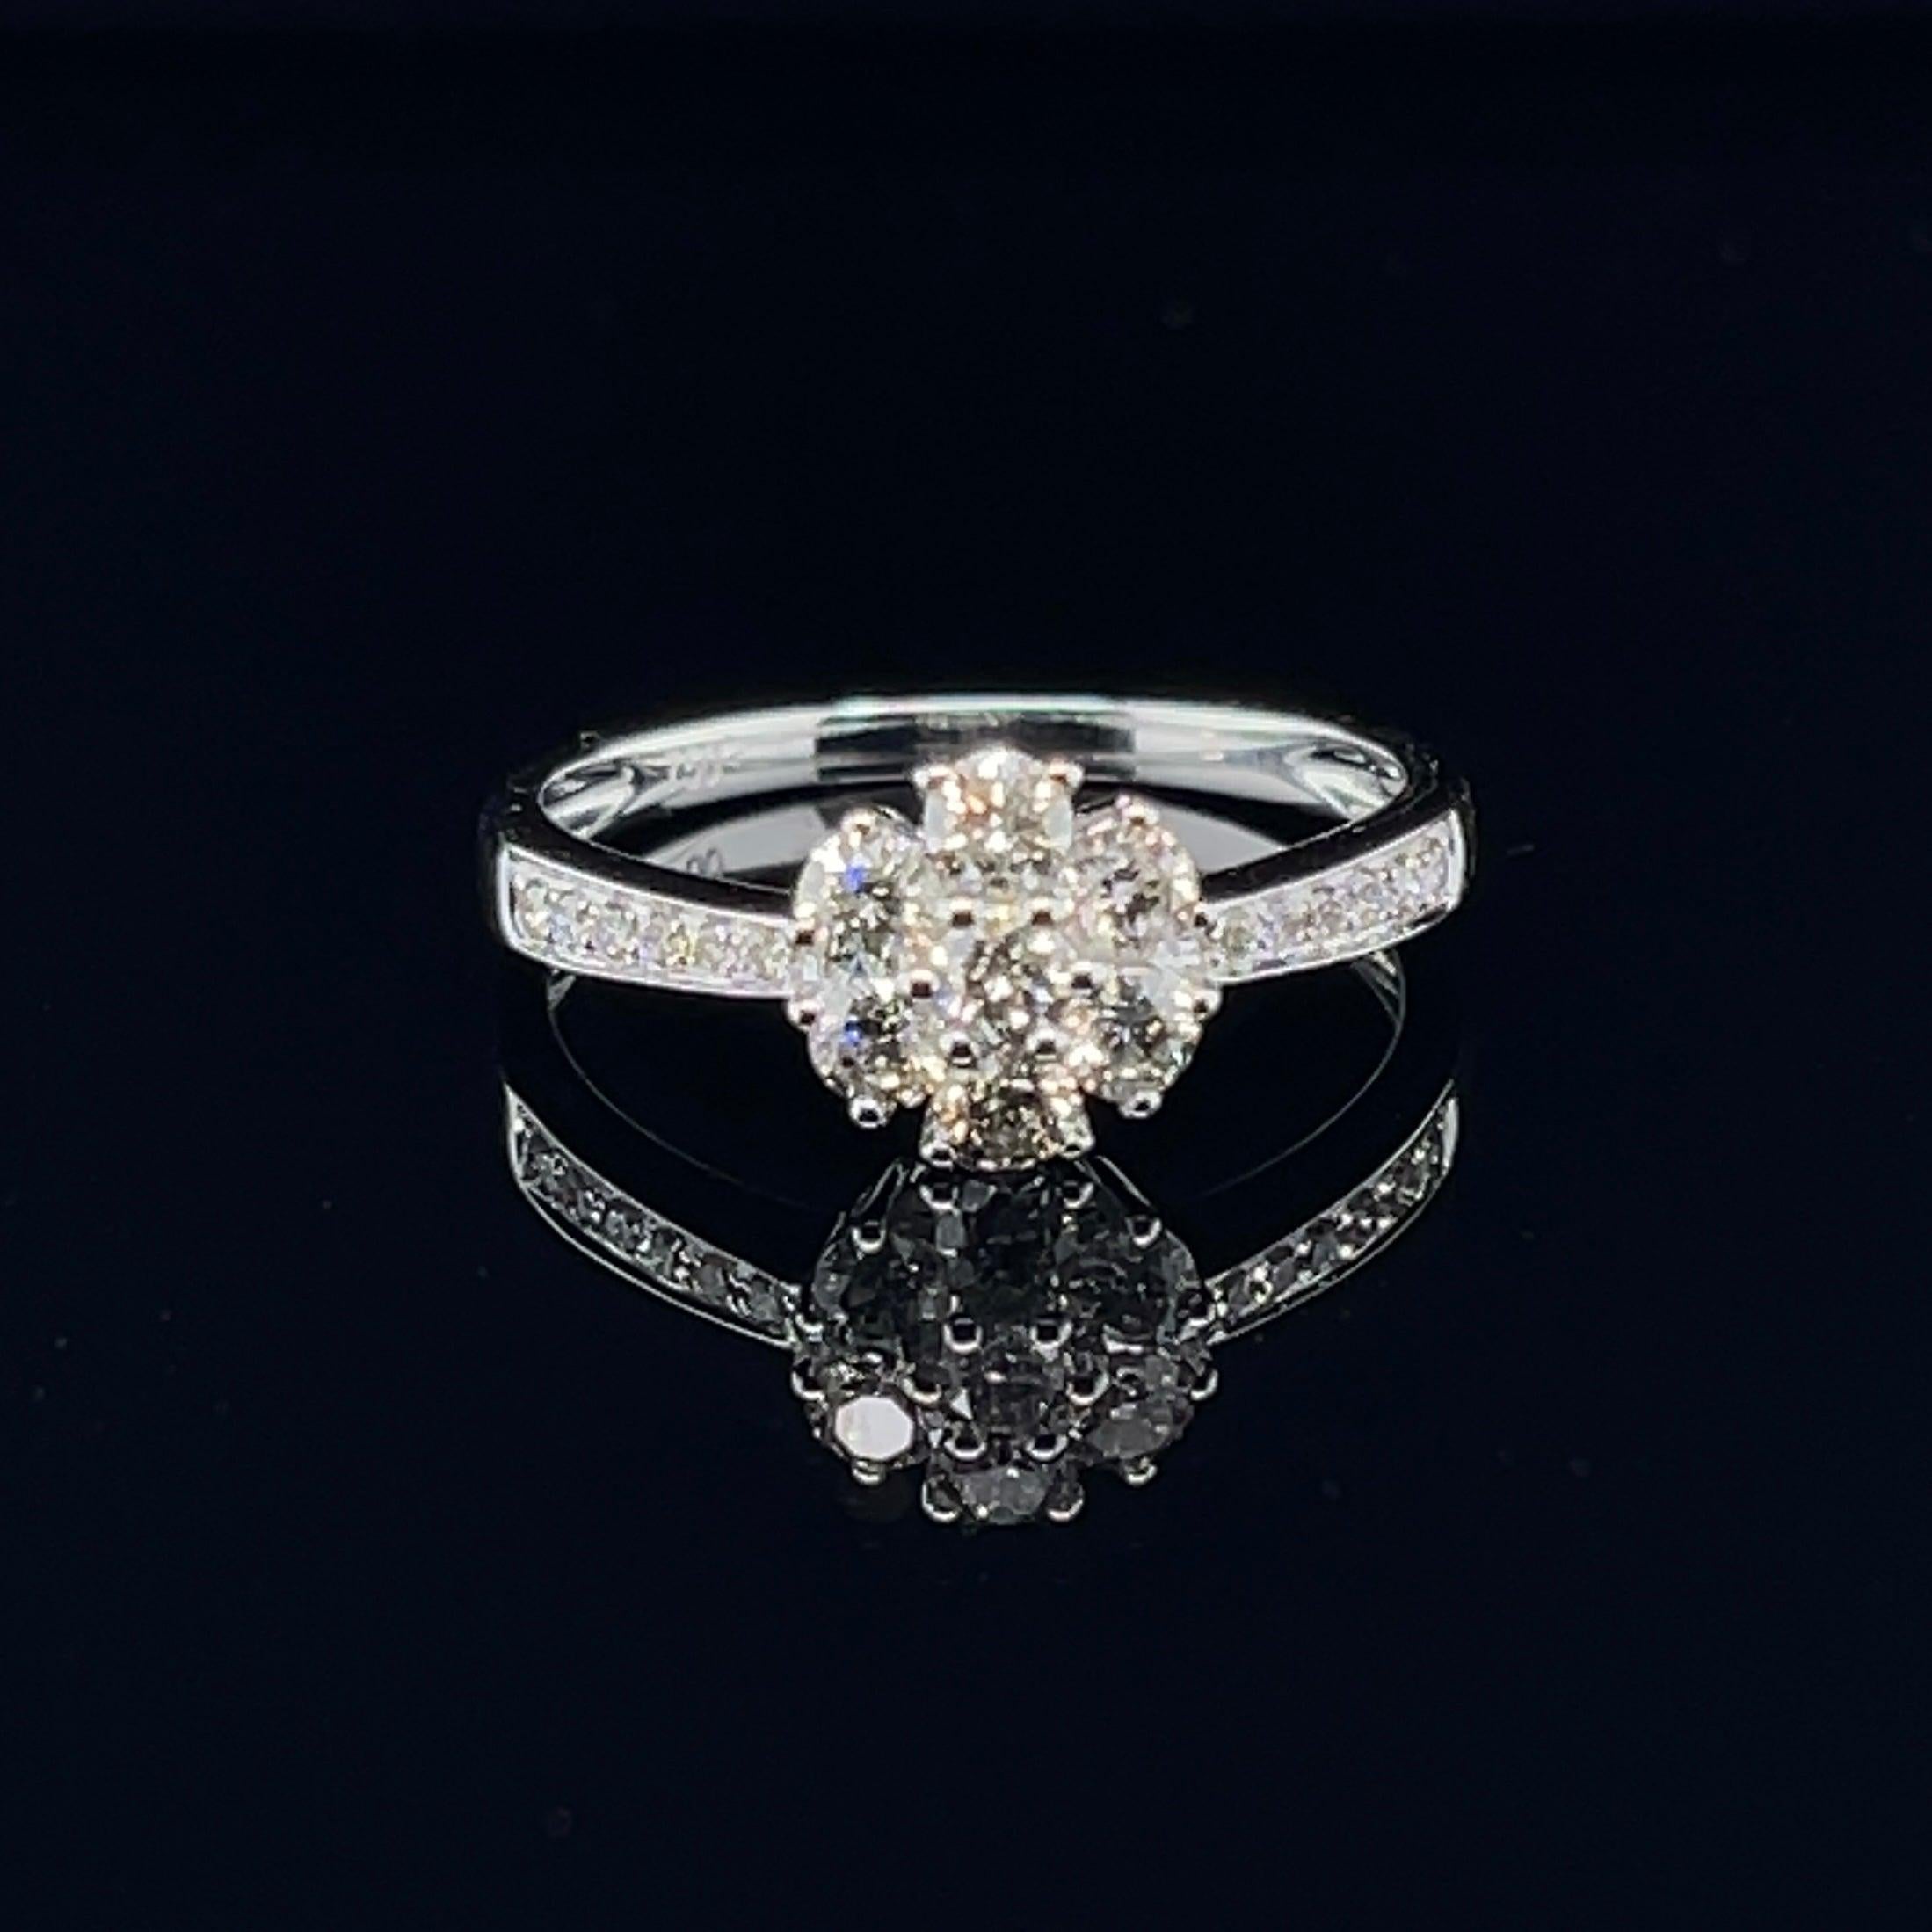 18ct white gold engagement ring